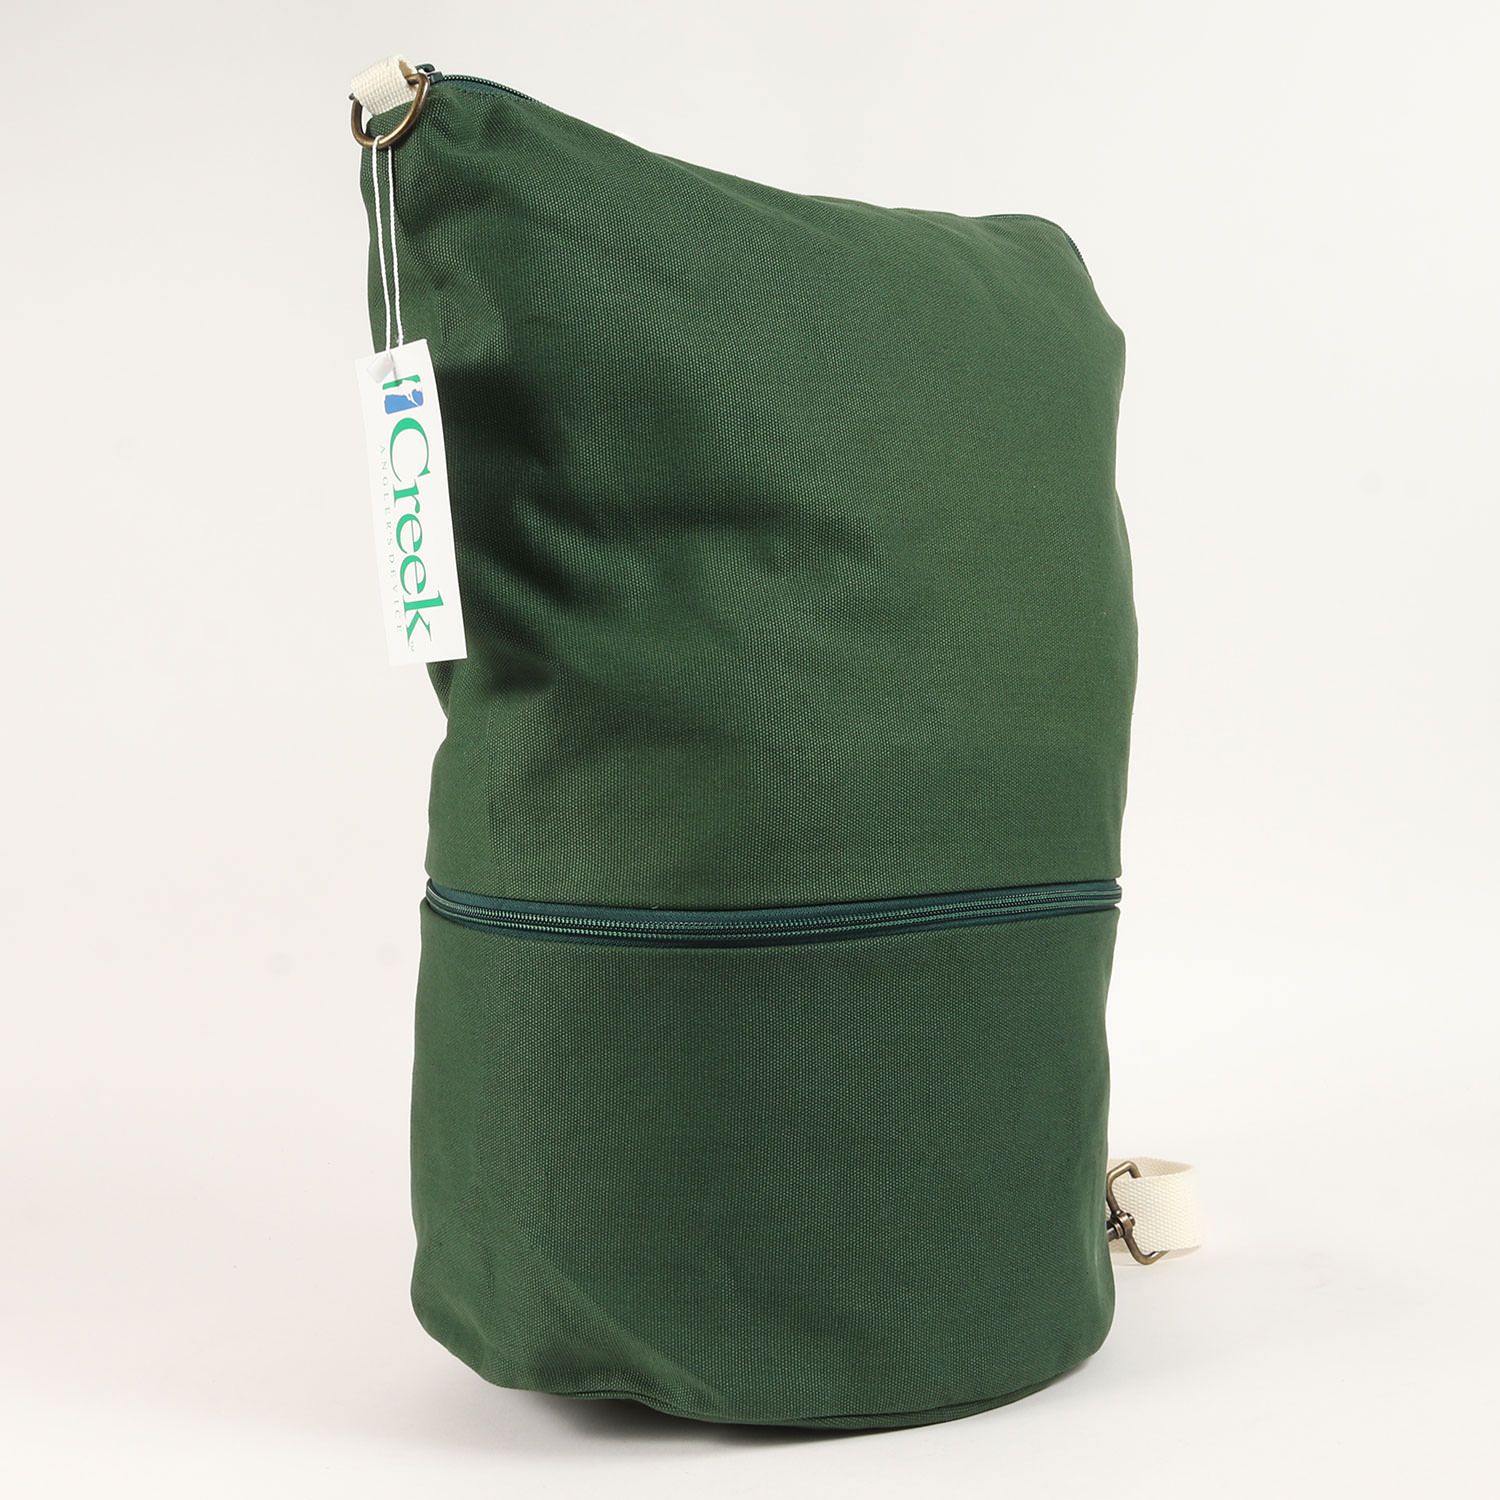 Creek Angler's Device laundry bag バッグ - バッグ